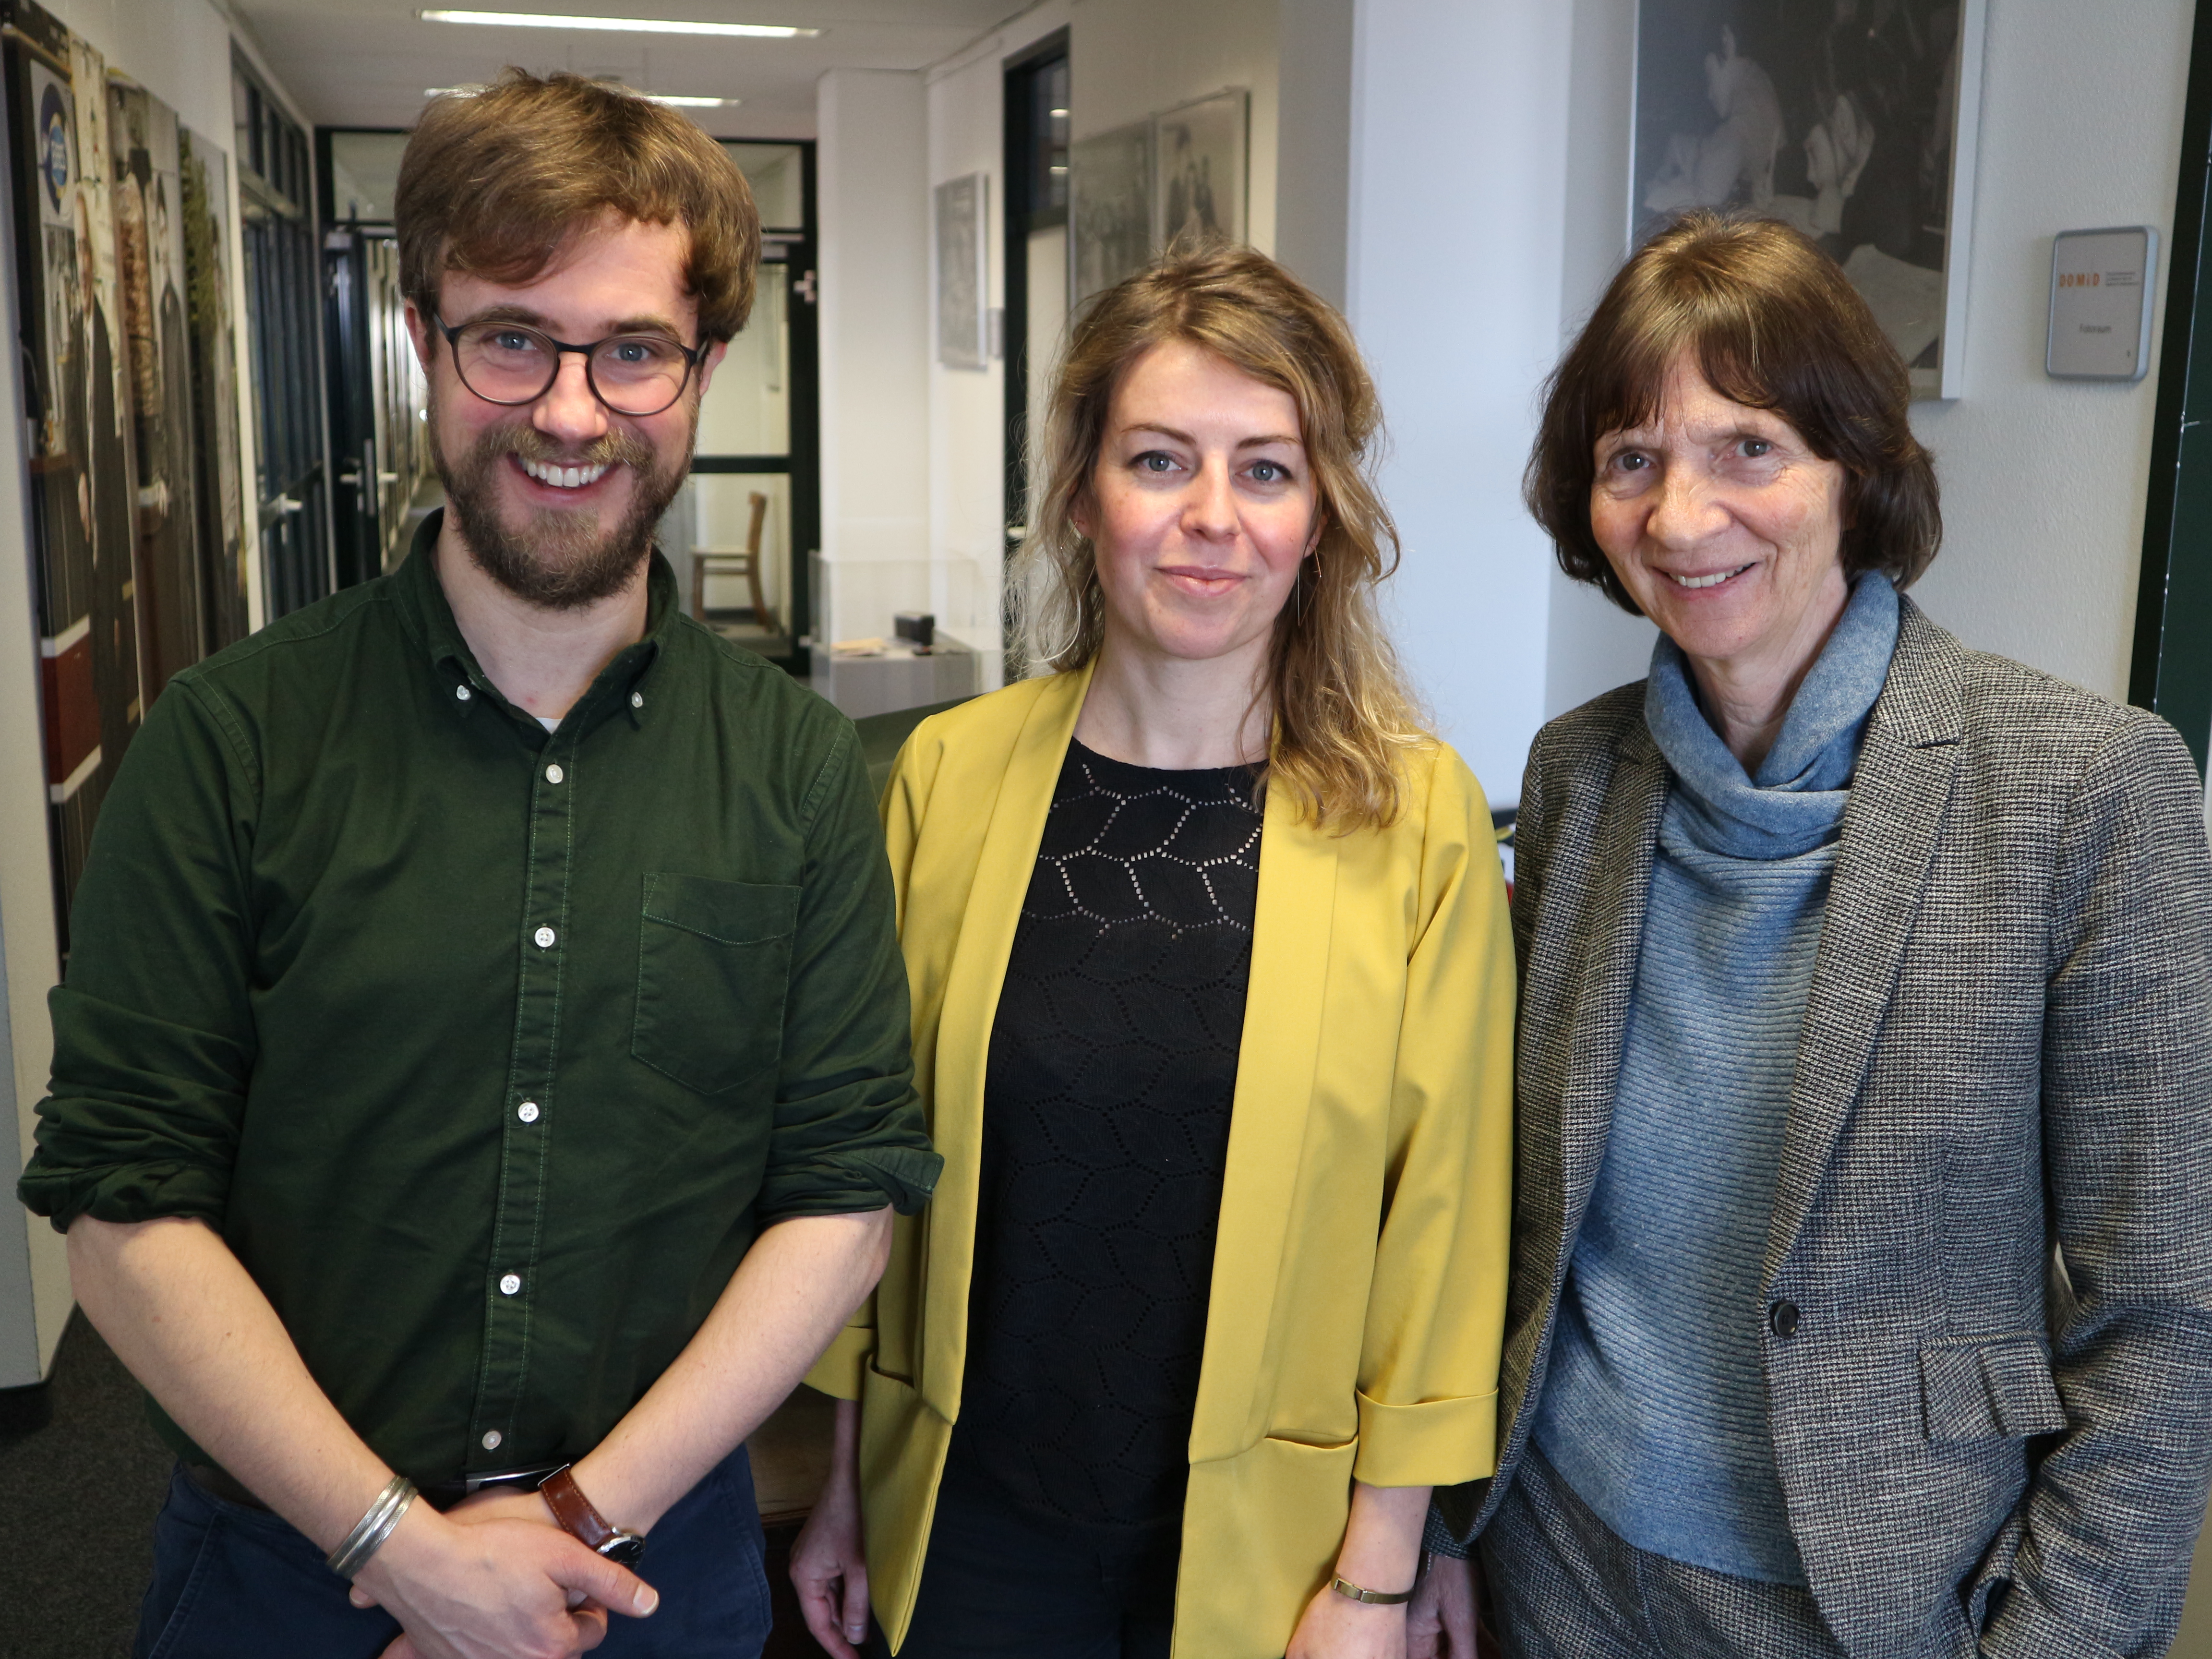 2019: On February 20, 2019 DOMiD received a visit from Prof. Dr. Dr. h.c.. Aleida Assmann. The literary and cultural scholar and Peace Prize winner of the German Book Trade informed herself about the status of the plans for the House of Immigration Society. Photo: DOMiD Archive, Cologne